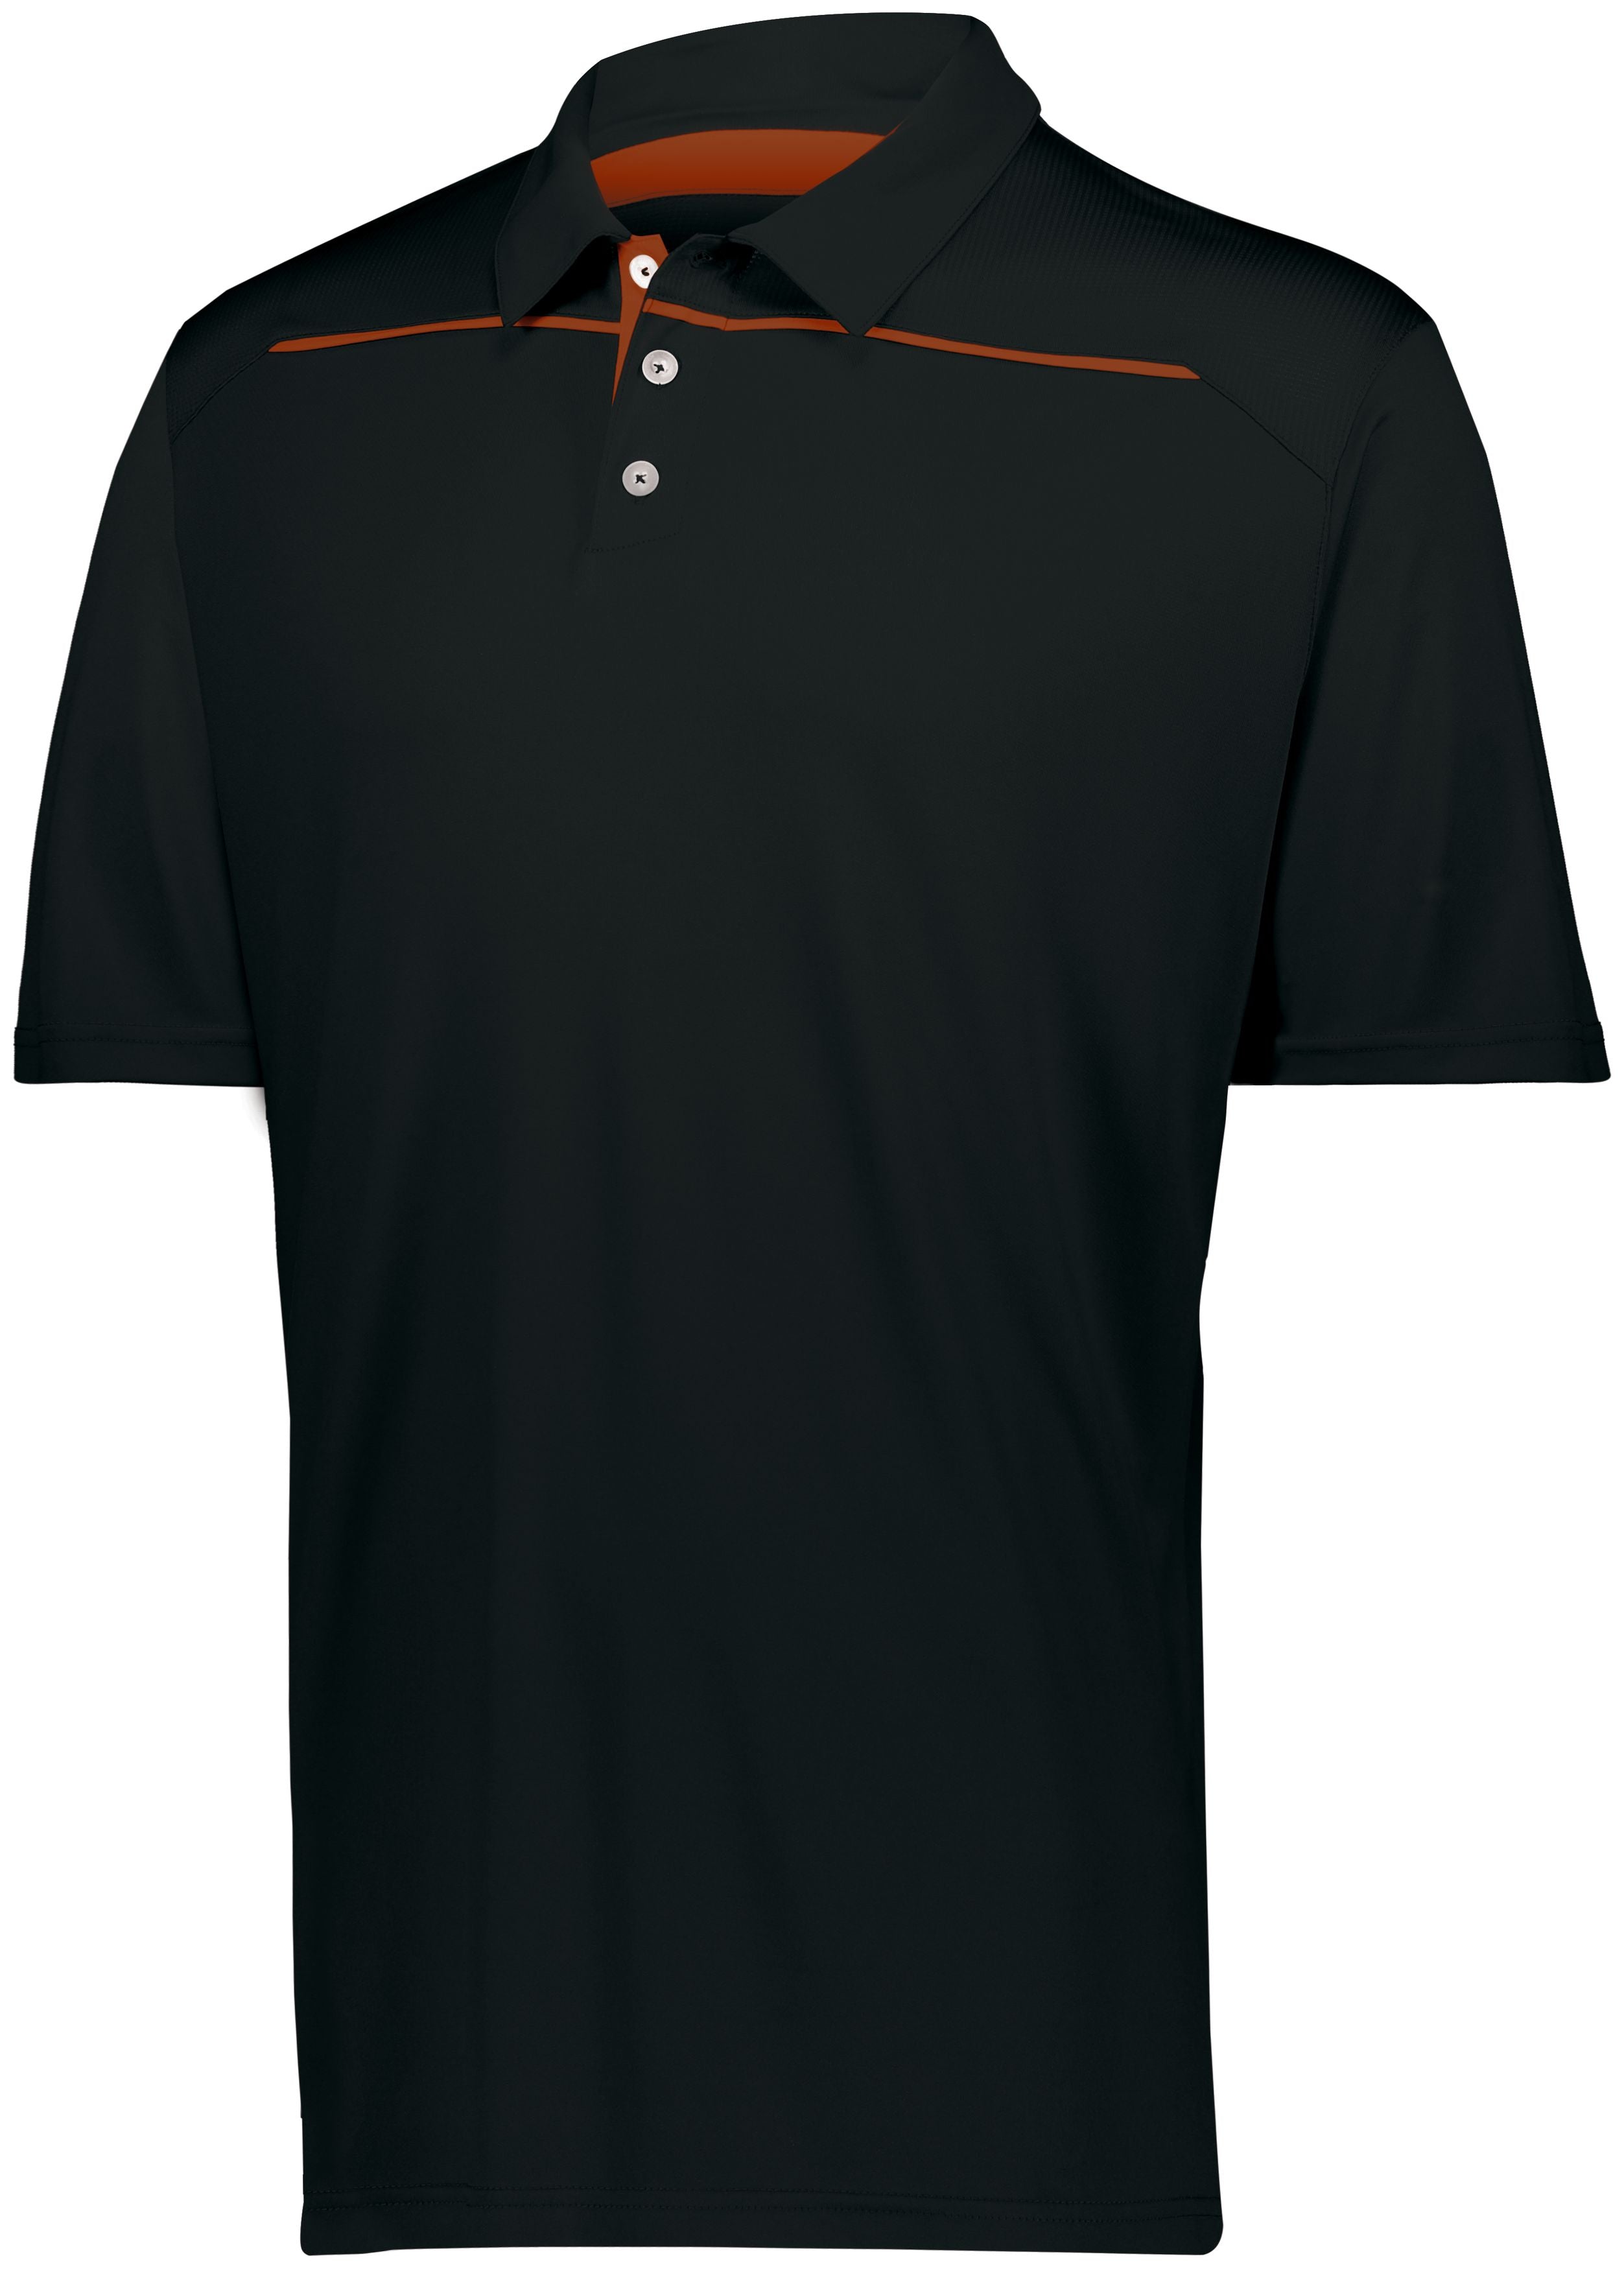 Holloway Defer Polo in Black/Orange  -Part of the Adult, Adult-Polos, Polos, Holloway, Shirts product lines at KanaleyCreations.com